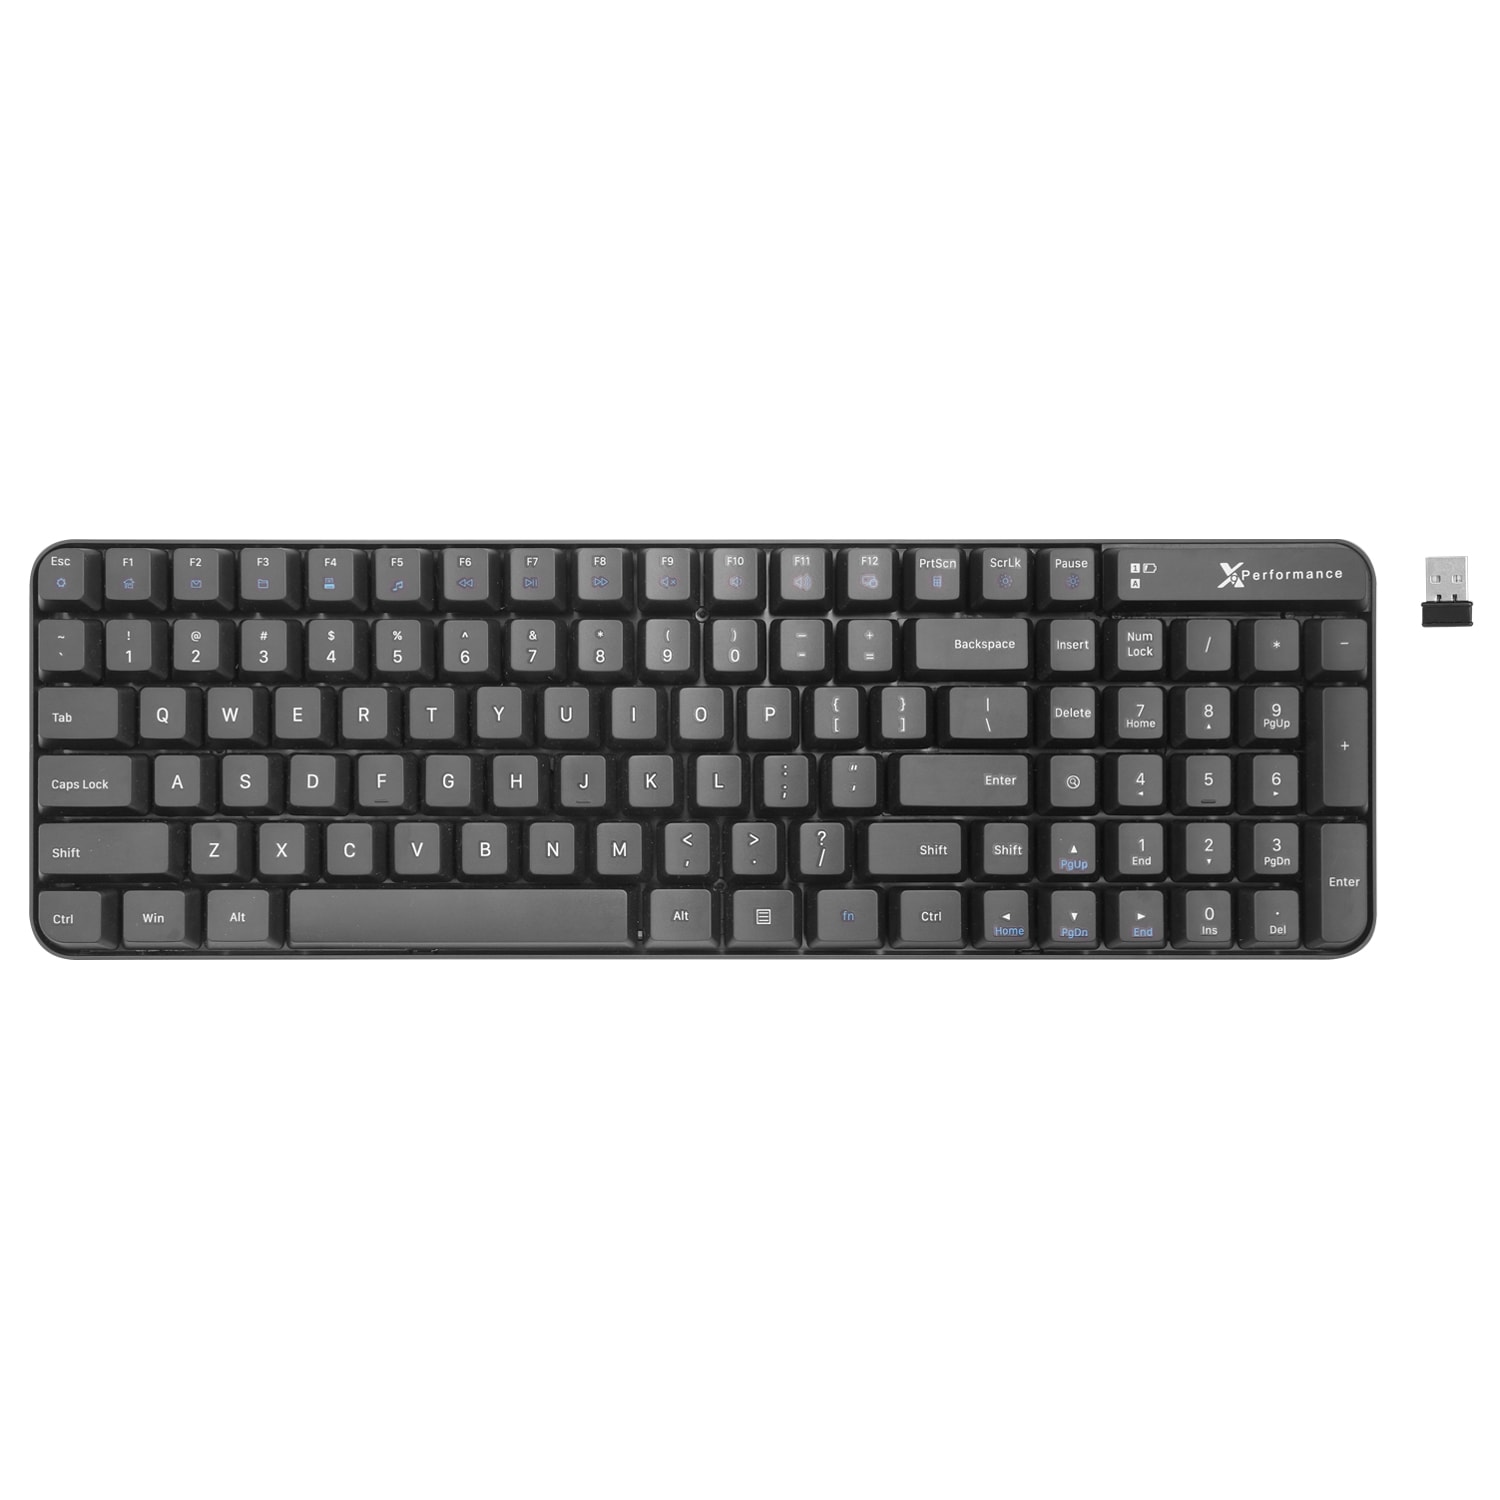 Macally X9 Performance Small Wireless Keyboard - 20% Reduction in